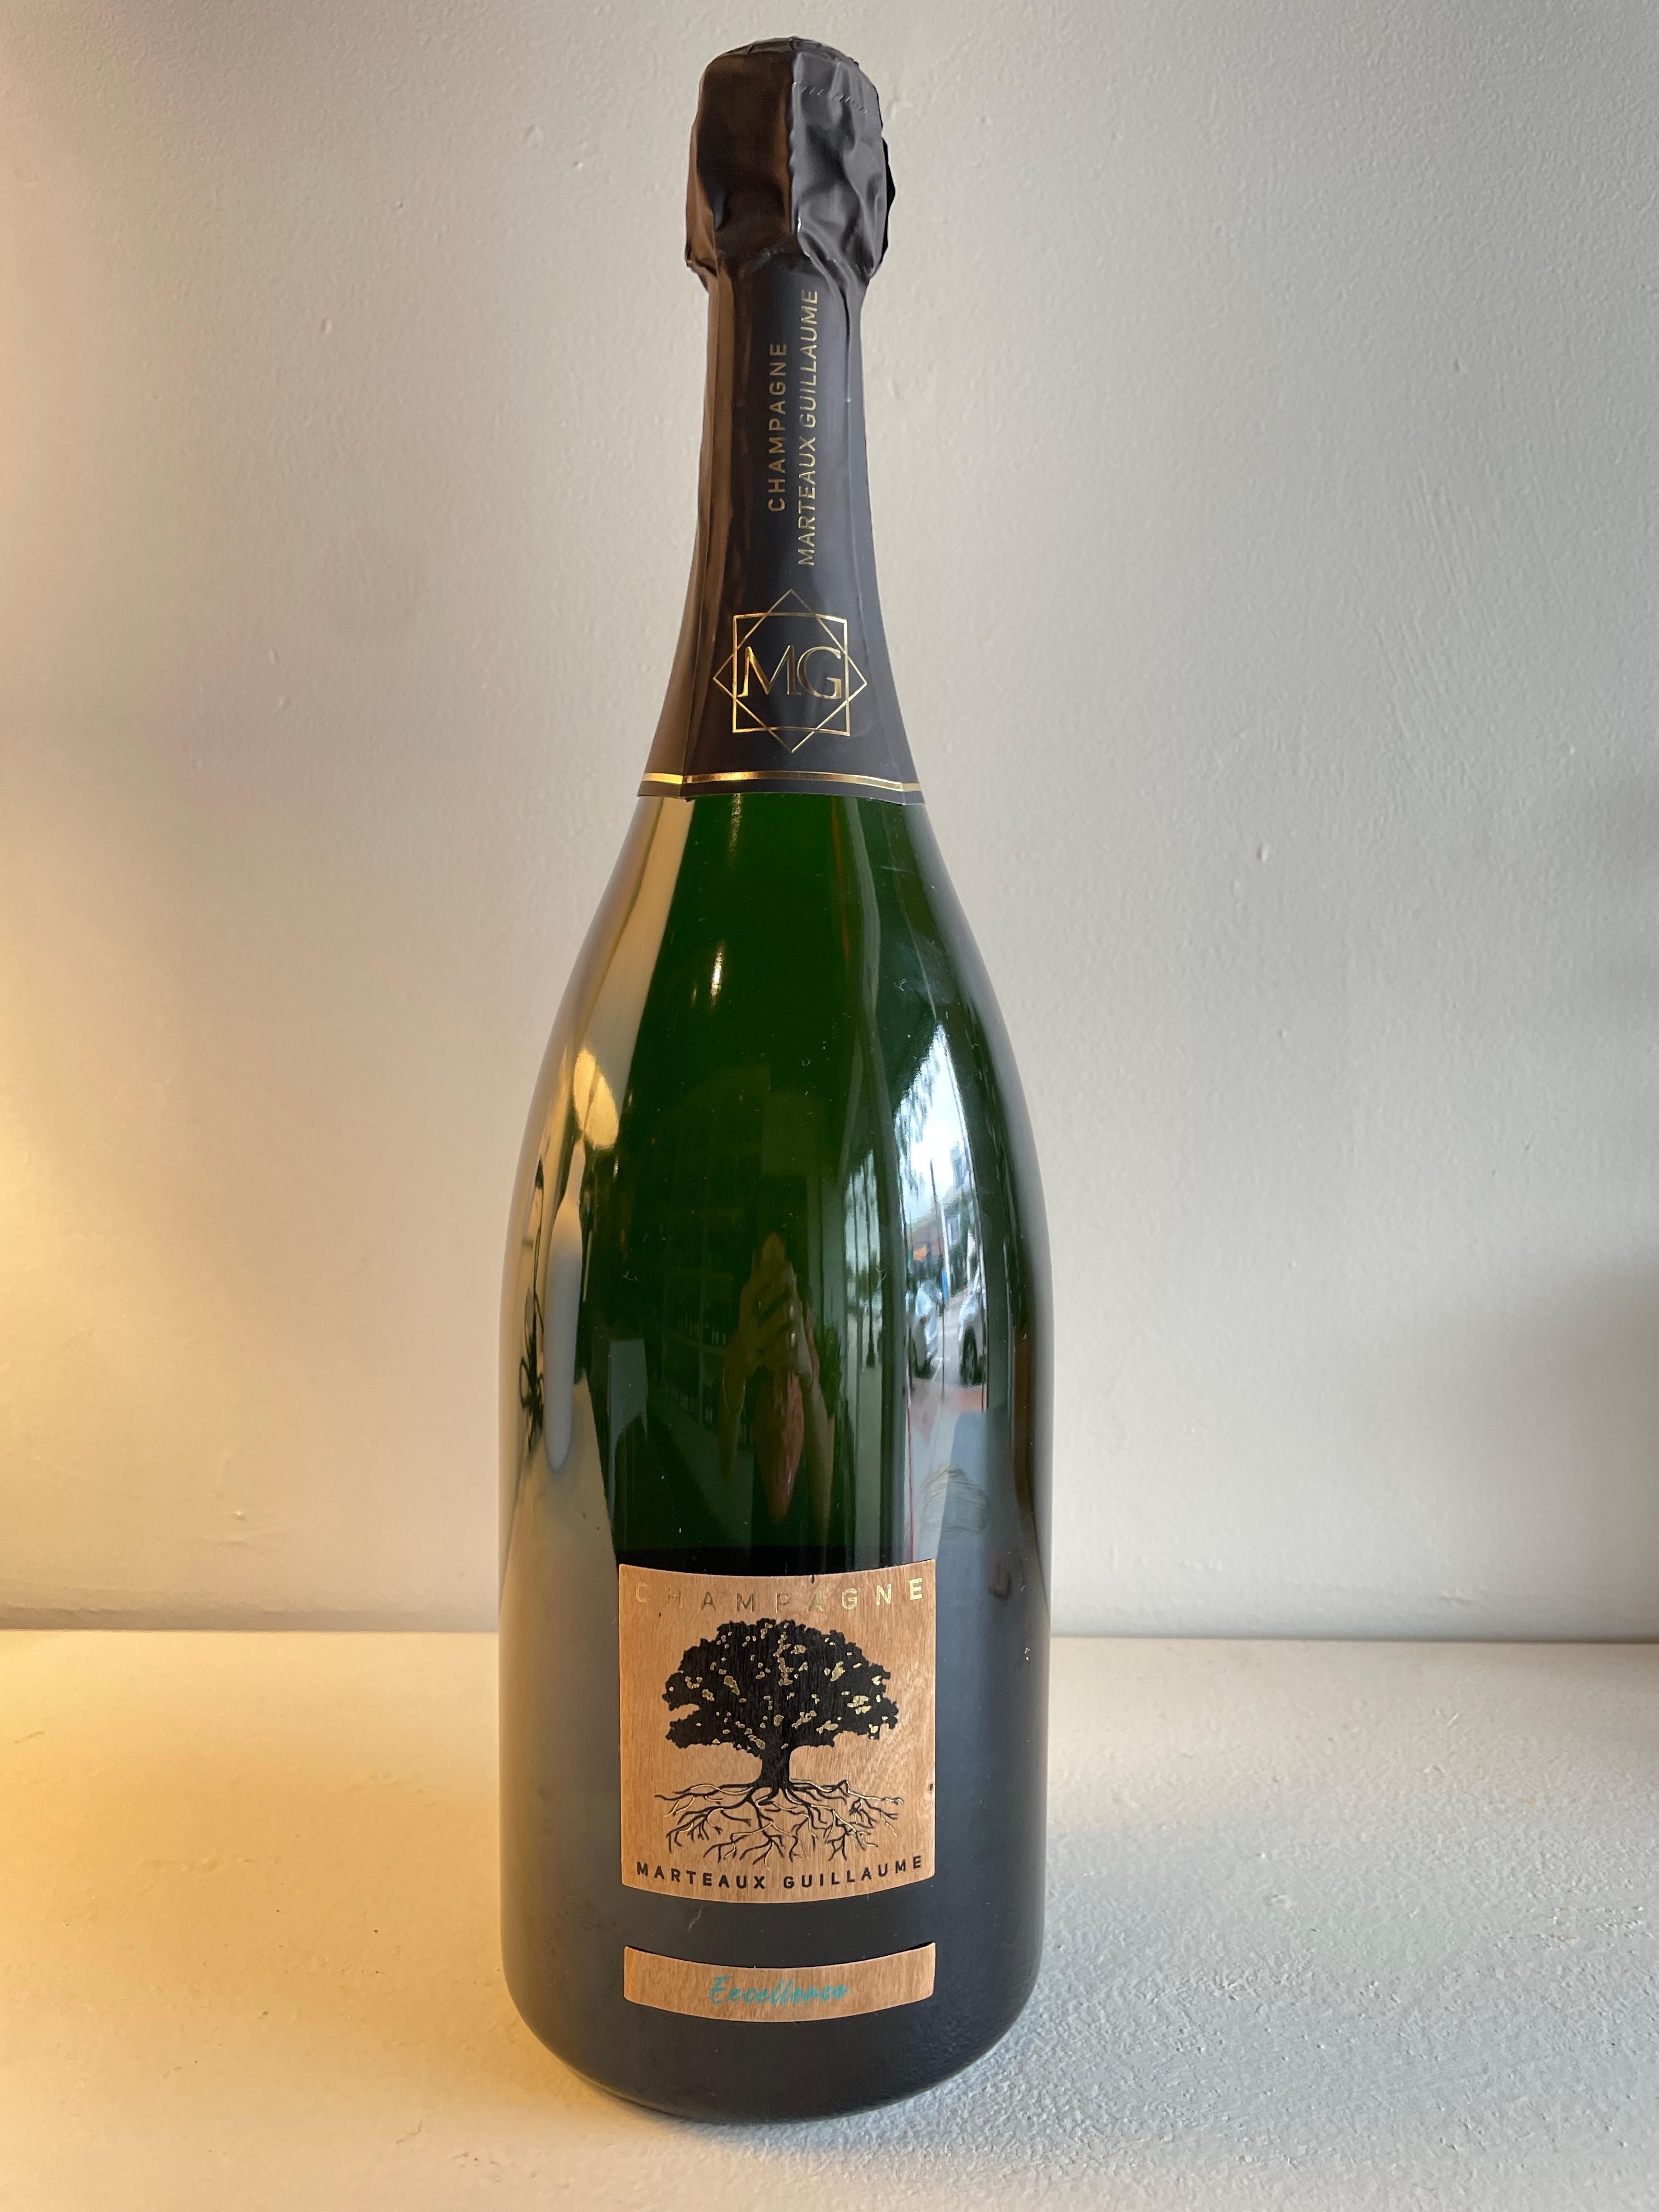 2017 Champagne "Excellence" Extra Brut, Martheaux Guillaume (magnum)